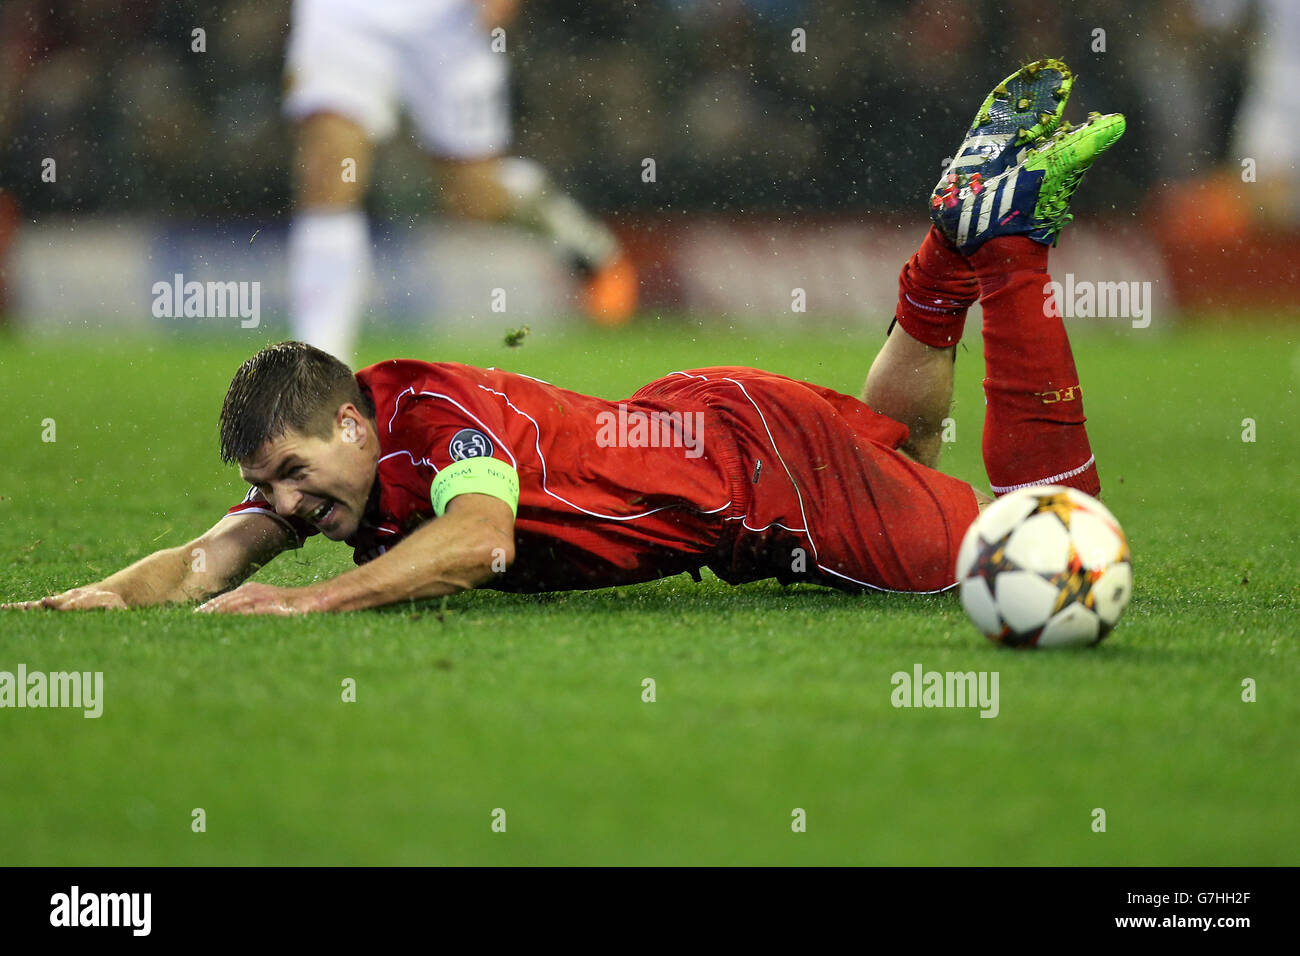 Soccer - UEFA Champions League - Group B - Liverpool v Basel - Anfield. Liverpool's Steven Gerrard lays on the floor after going down in the penalty area. Stock Photo